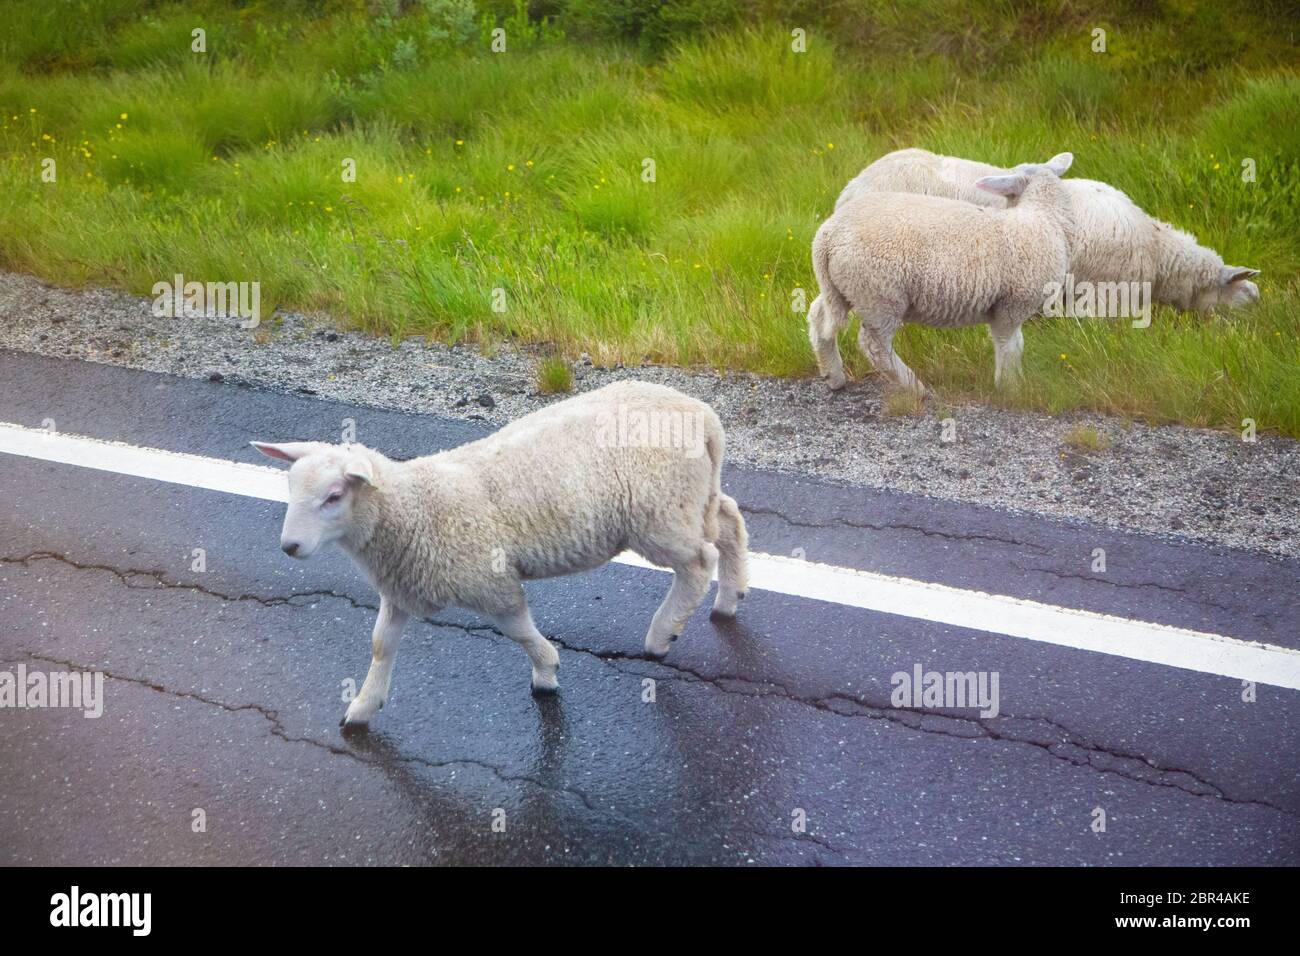 Sheep crossing an asphalt road, close-up. Sheep walking along road. Sheep grazing on pasture and crossing asphalt road, view from above. Stock Photo